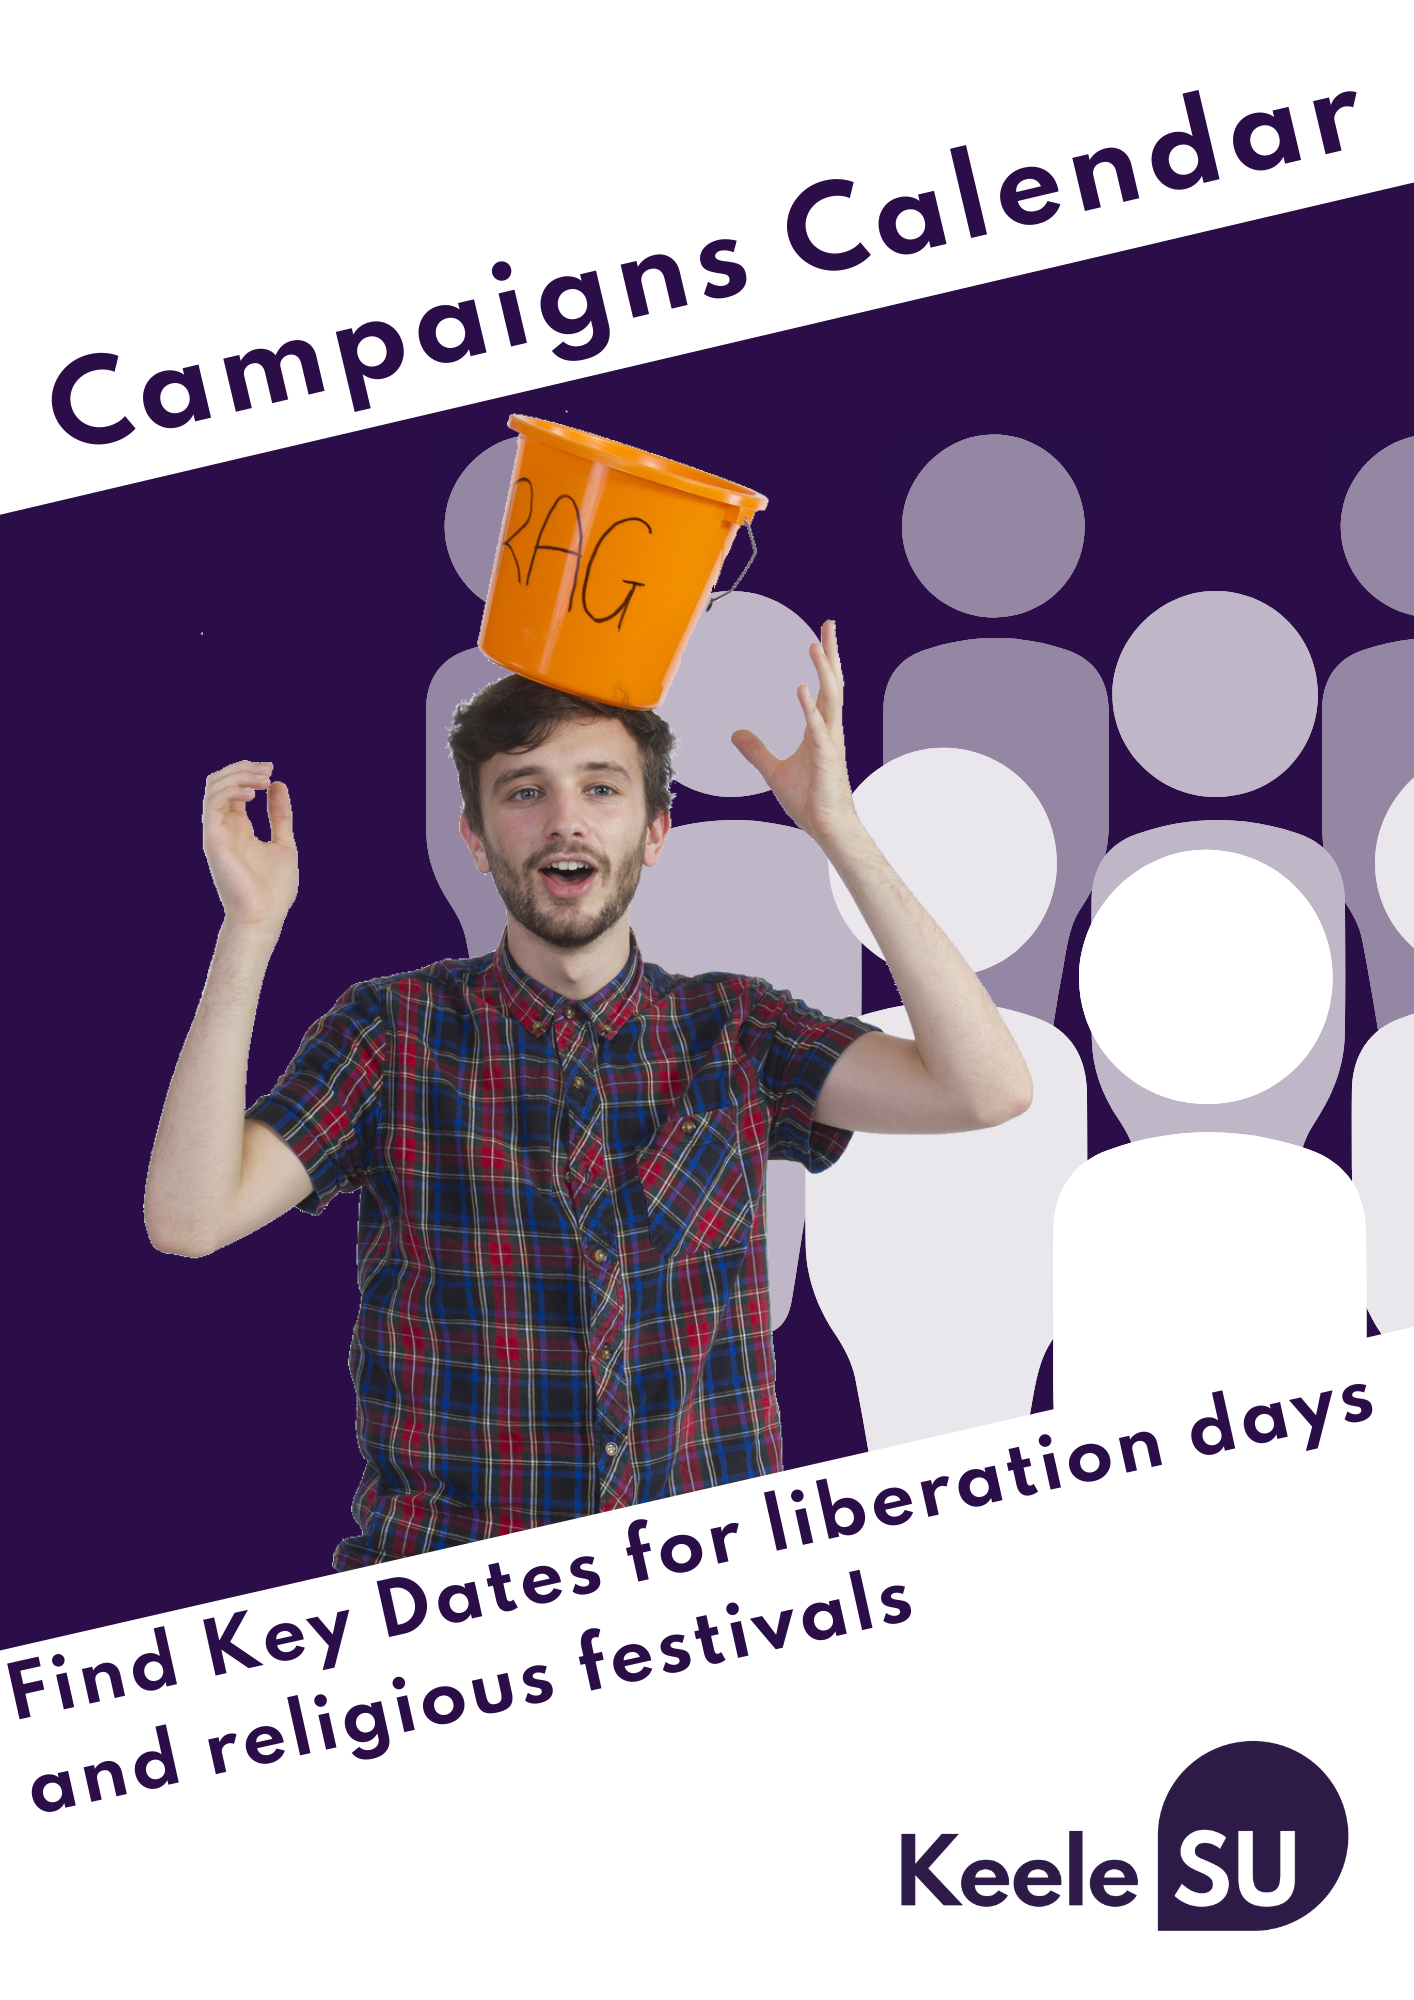 Campaigns Calendar - Student jumping for joy